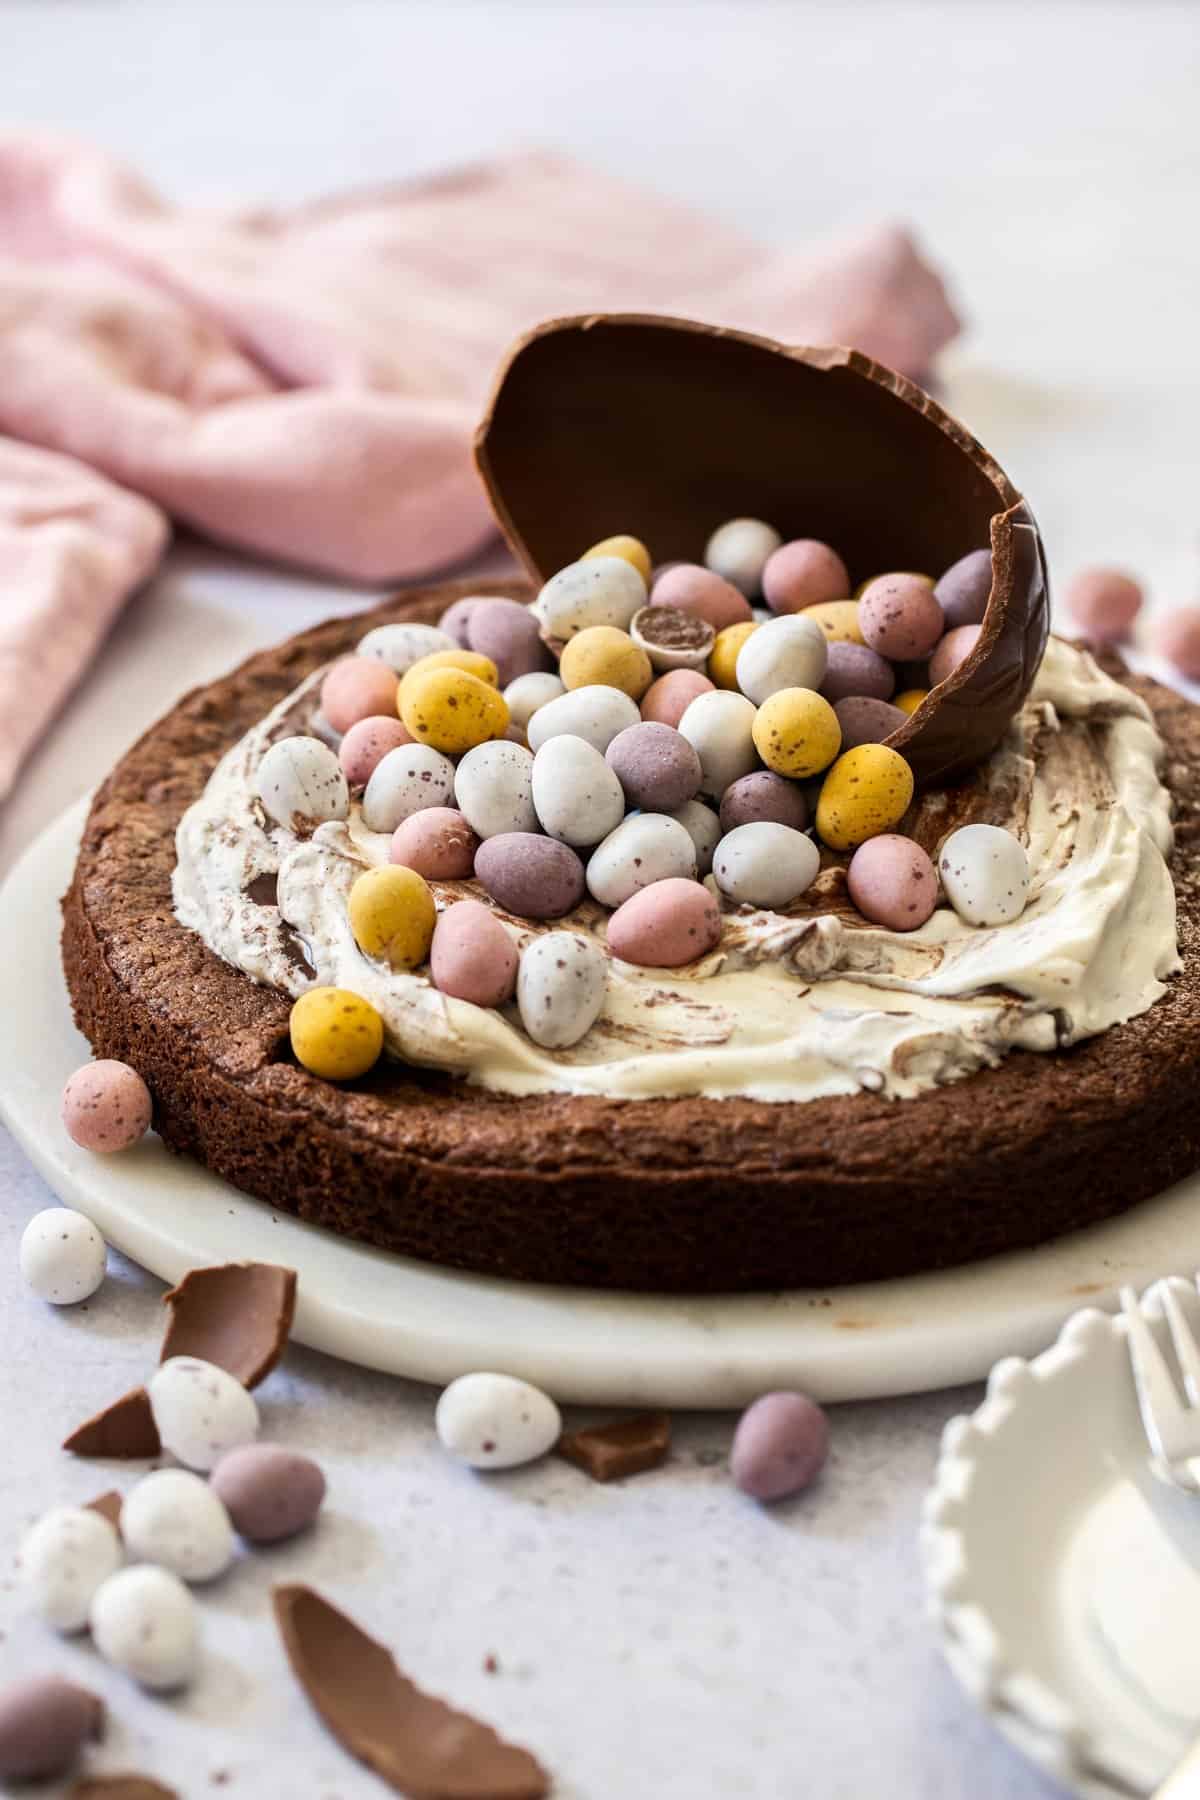 Whole cake sitting on a plate, decorated with cream and Easter chocolates.